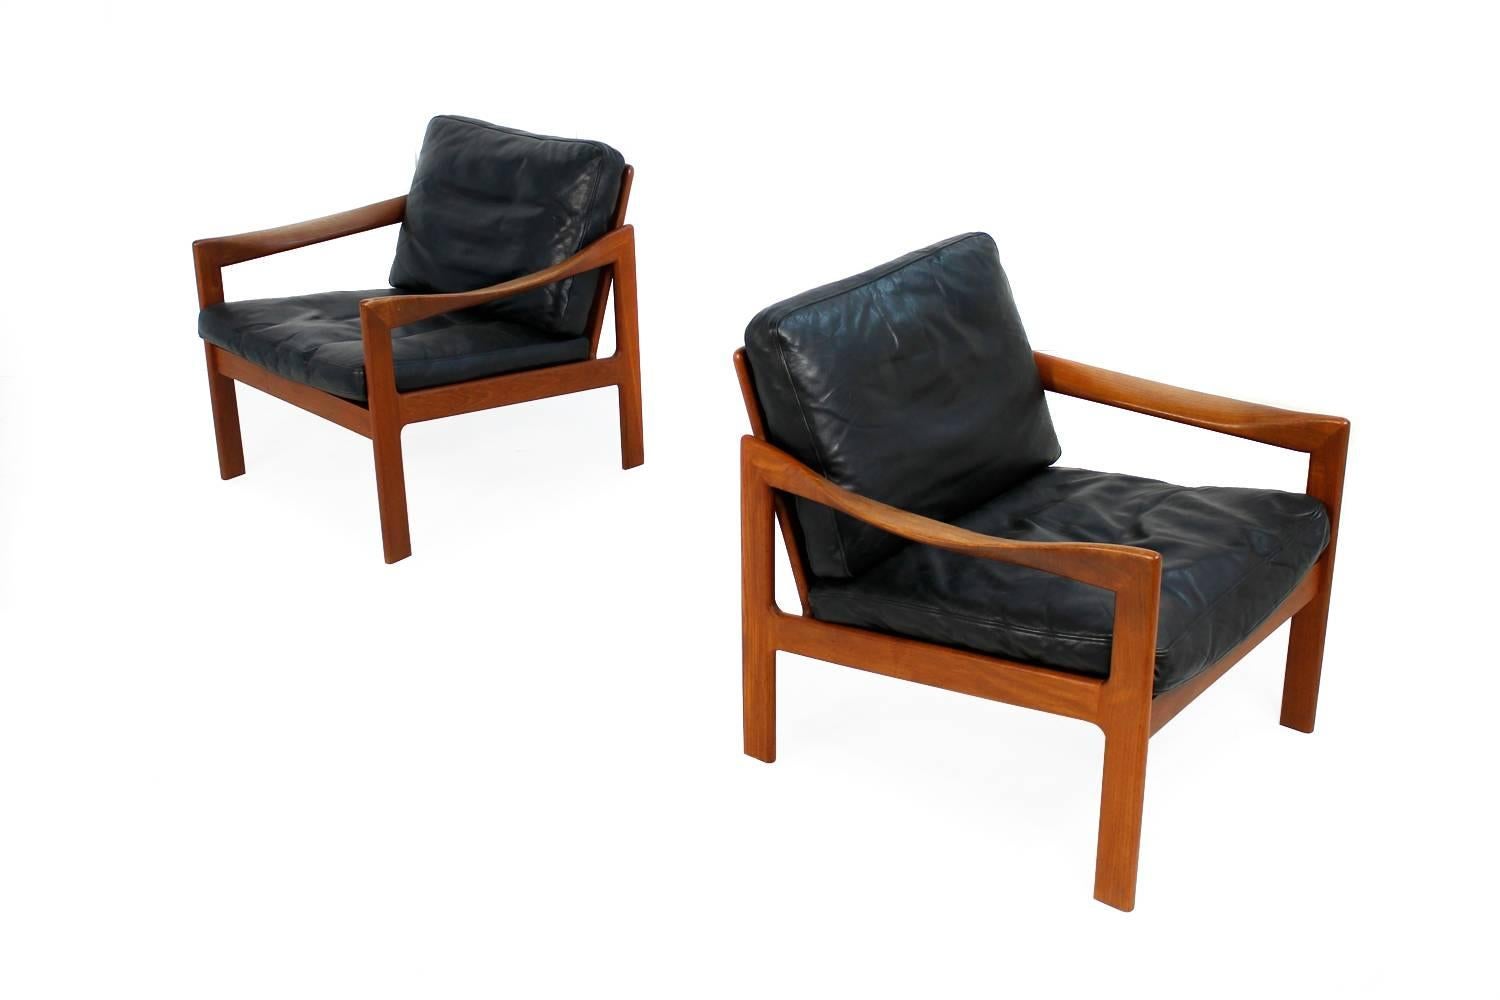 Mid-Century Modern Pair of Two 1960s Danish Modern Teak and Leather Easy Chairs by Illum Wikkelso